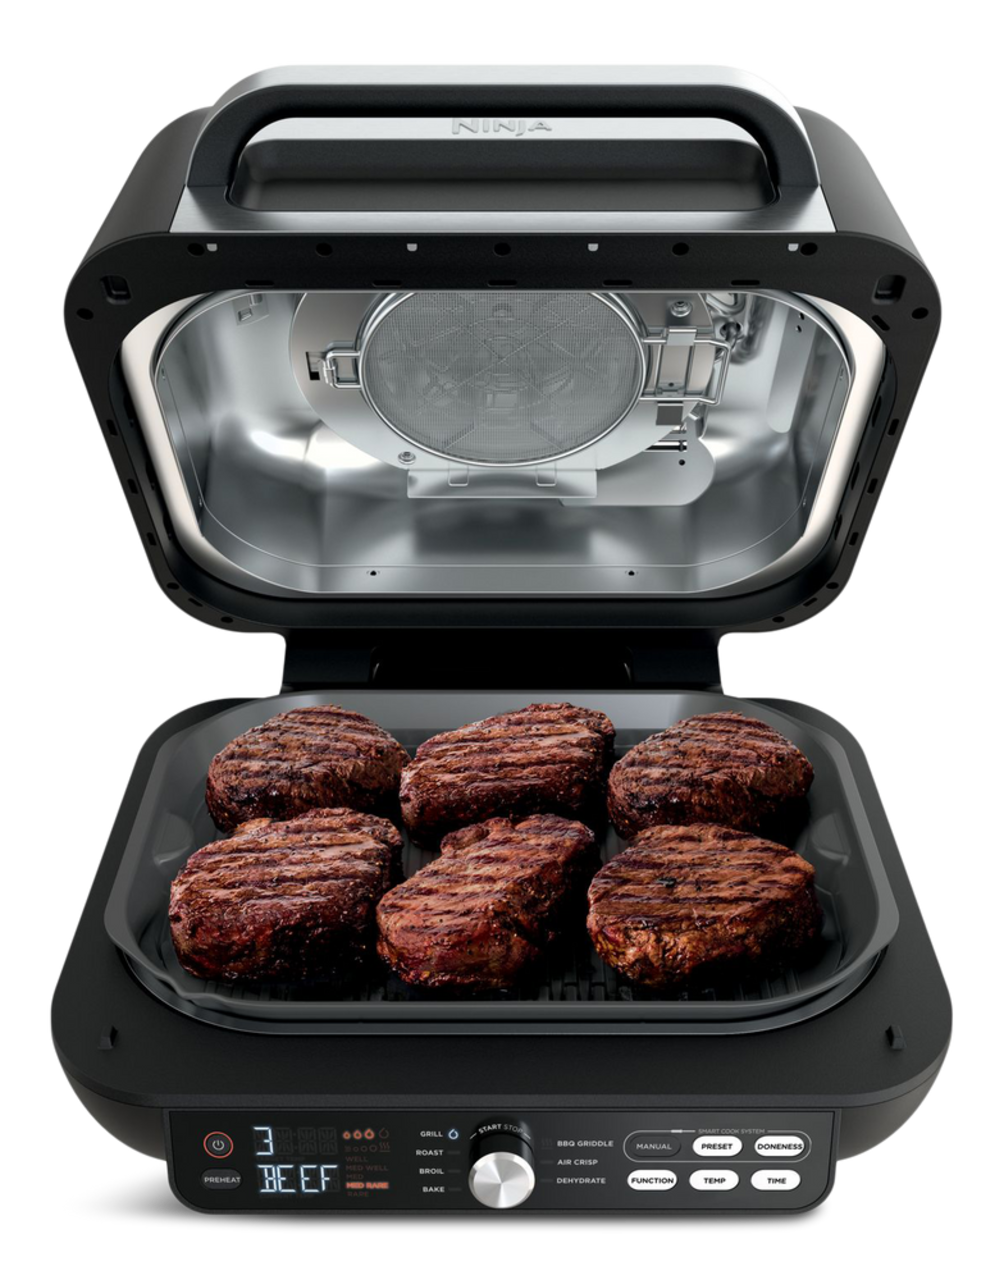 Ninja IG601 Foodi XL 7-in-1 Electric Indoor Grill Combo, use Opened or  Closed, Air Fry, Dehydrate & More, Pro Power Grate, Flat Top Griddle,  Crisper